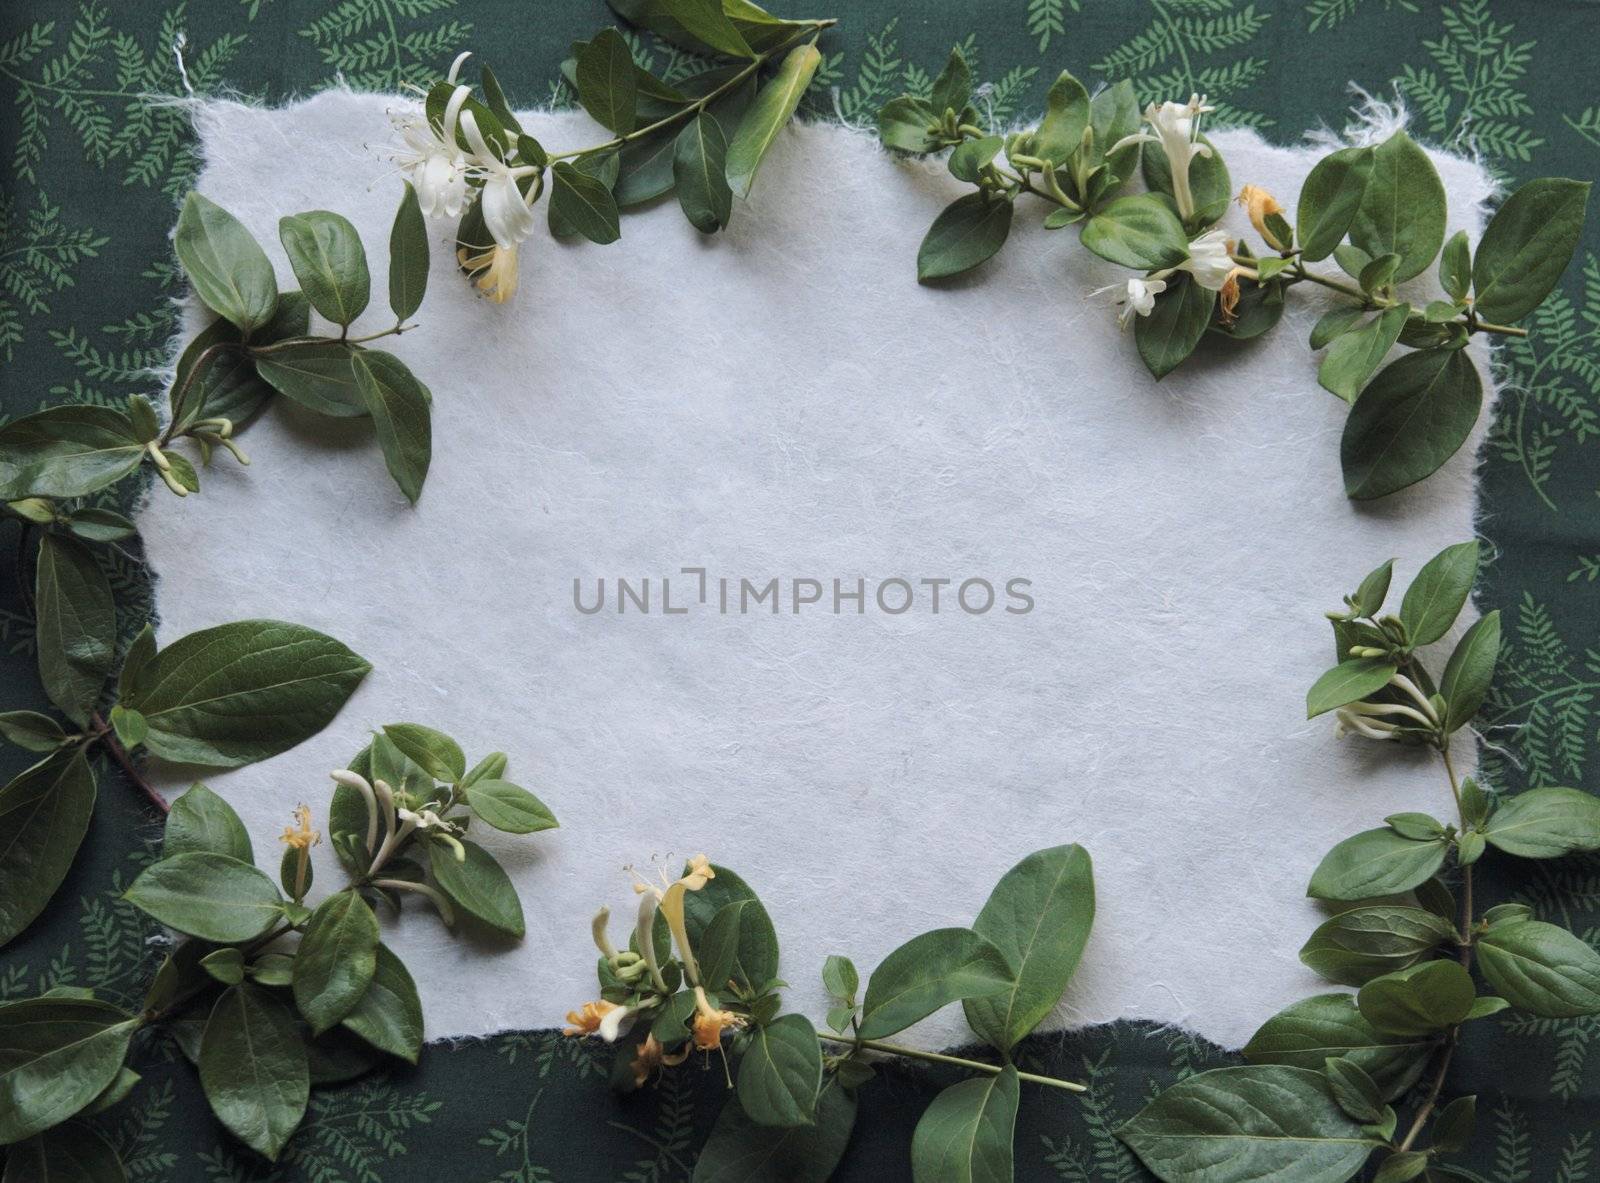 honeysuckle flowers and leaves on textured paper and green fabric